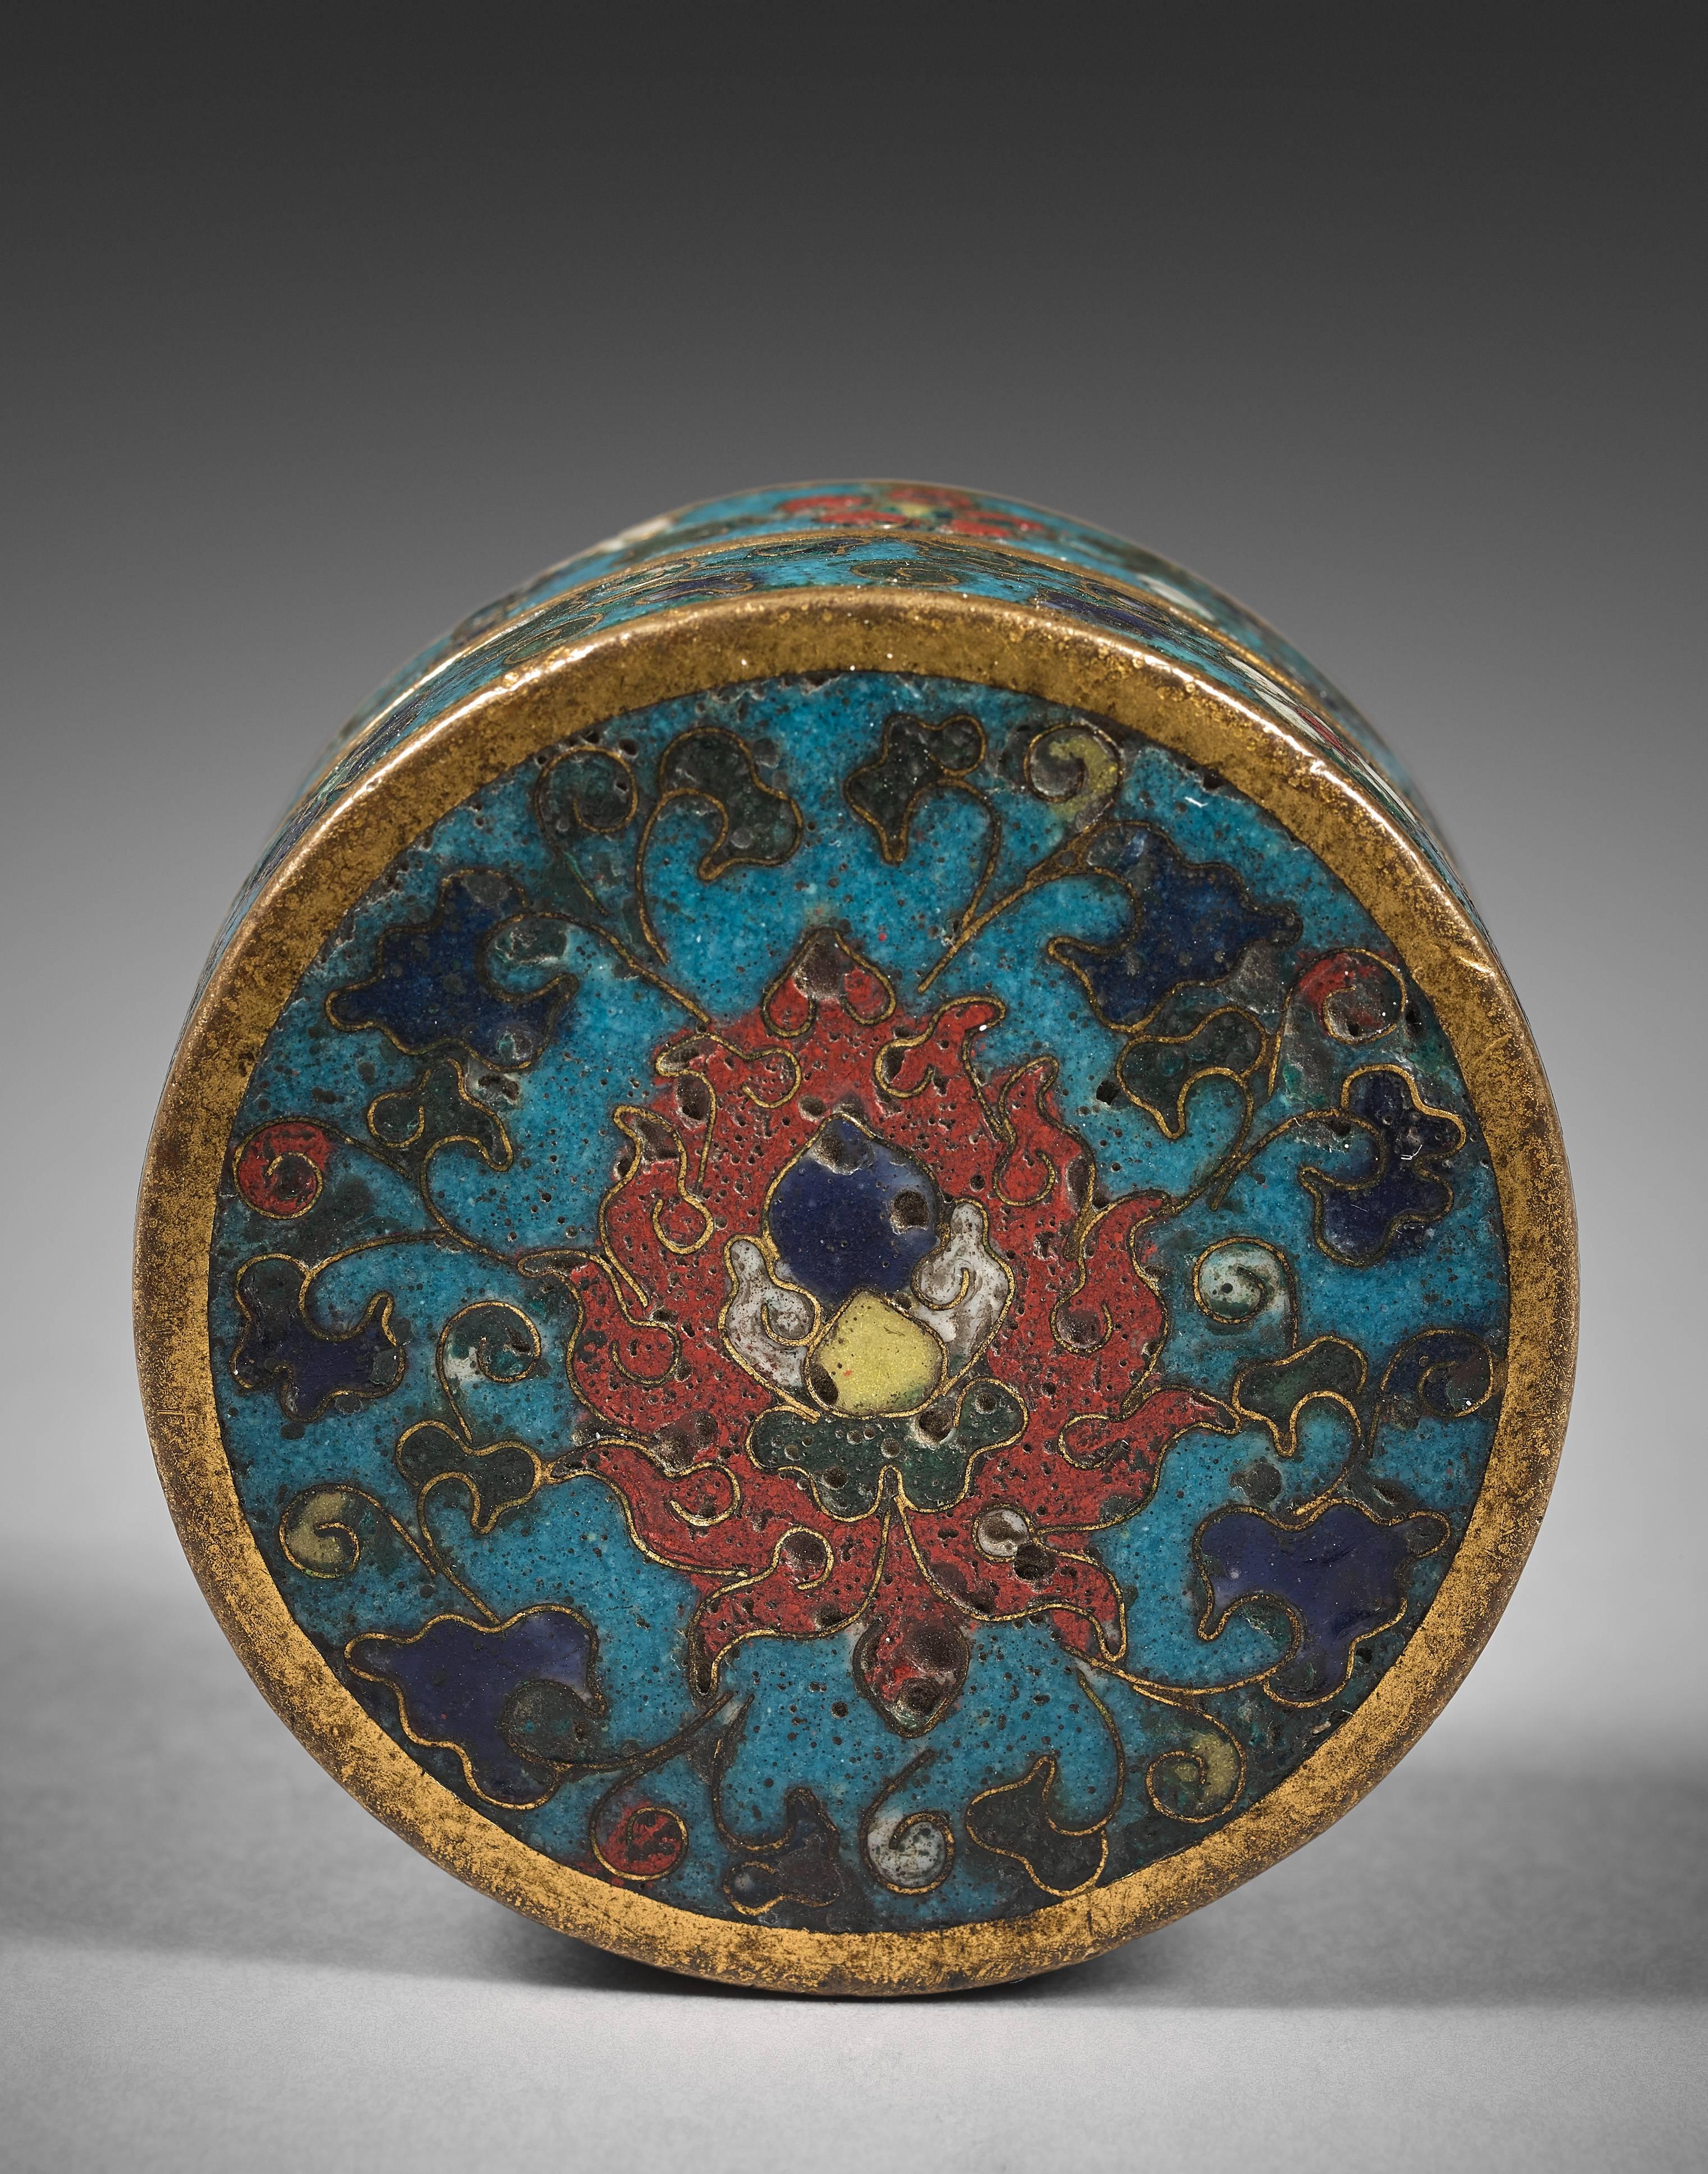 The circular-shaped box, decorated with red, blue, yellow, green and white cloisonné enamels. The lid decorated with a stylized lotus pattern and floral scrolls. The base and the inside gilded. 
From a Swiss Private collection

According to Brian